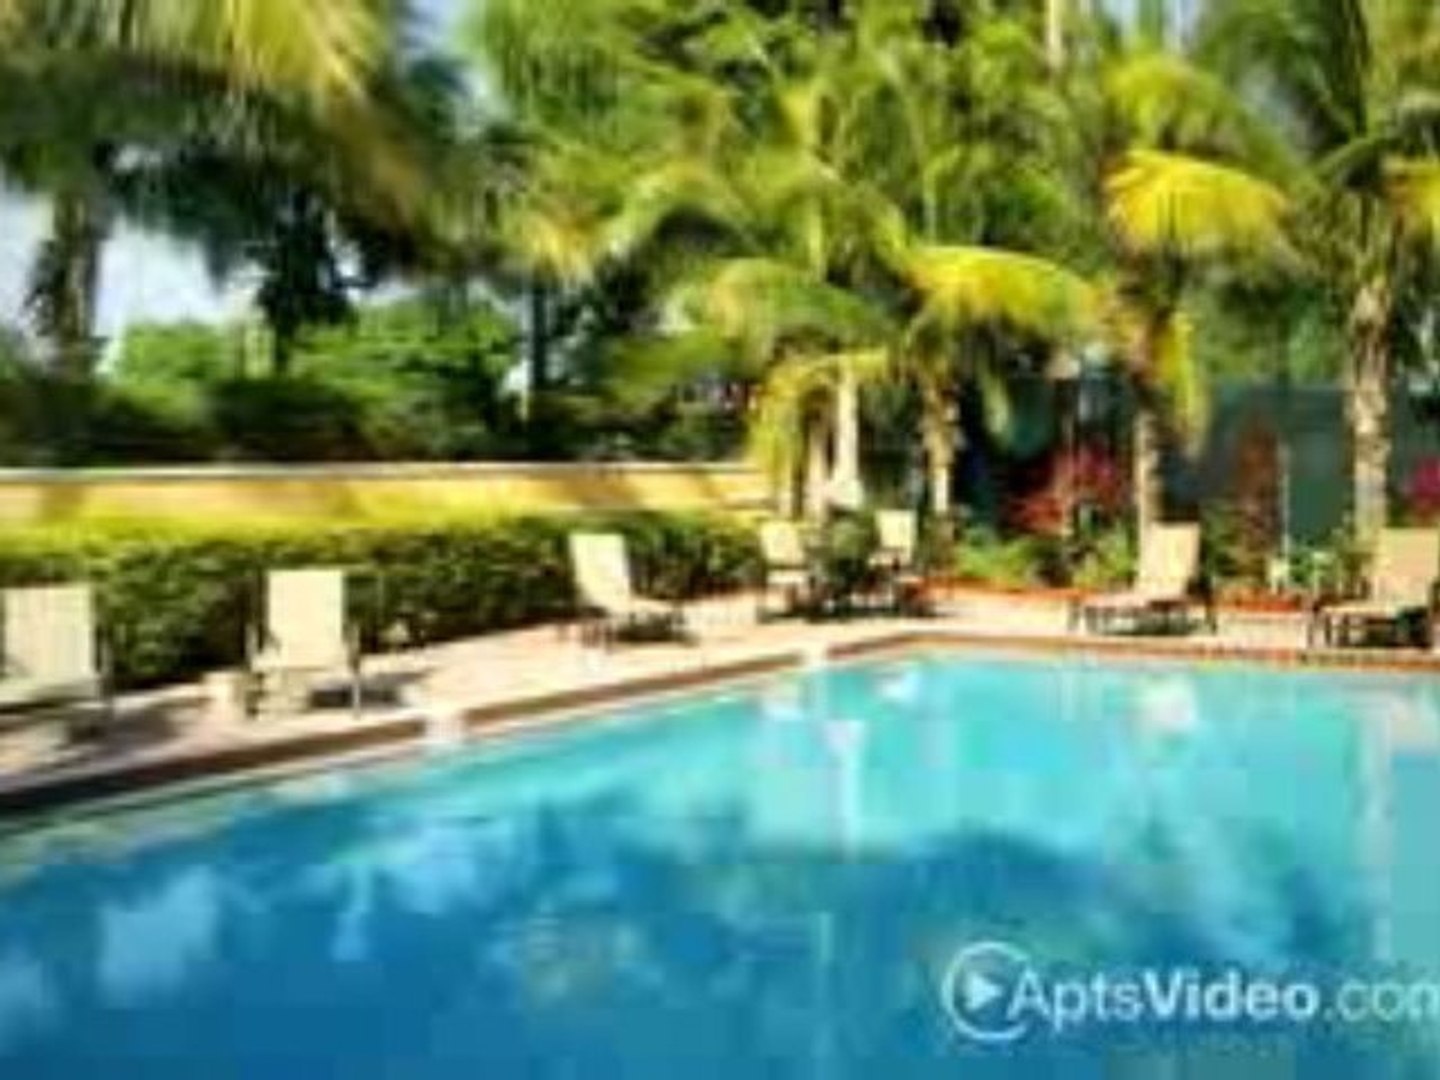 Mystic Gardens Apartments In Fort Myers Fl Forrent Com Video